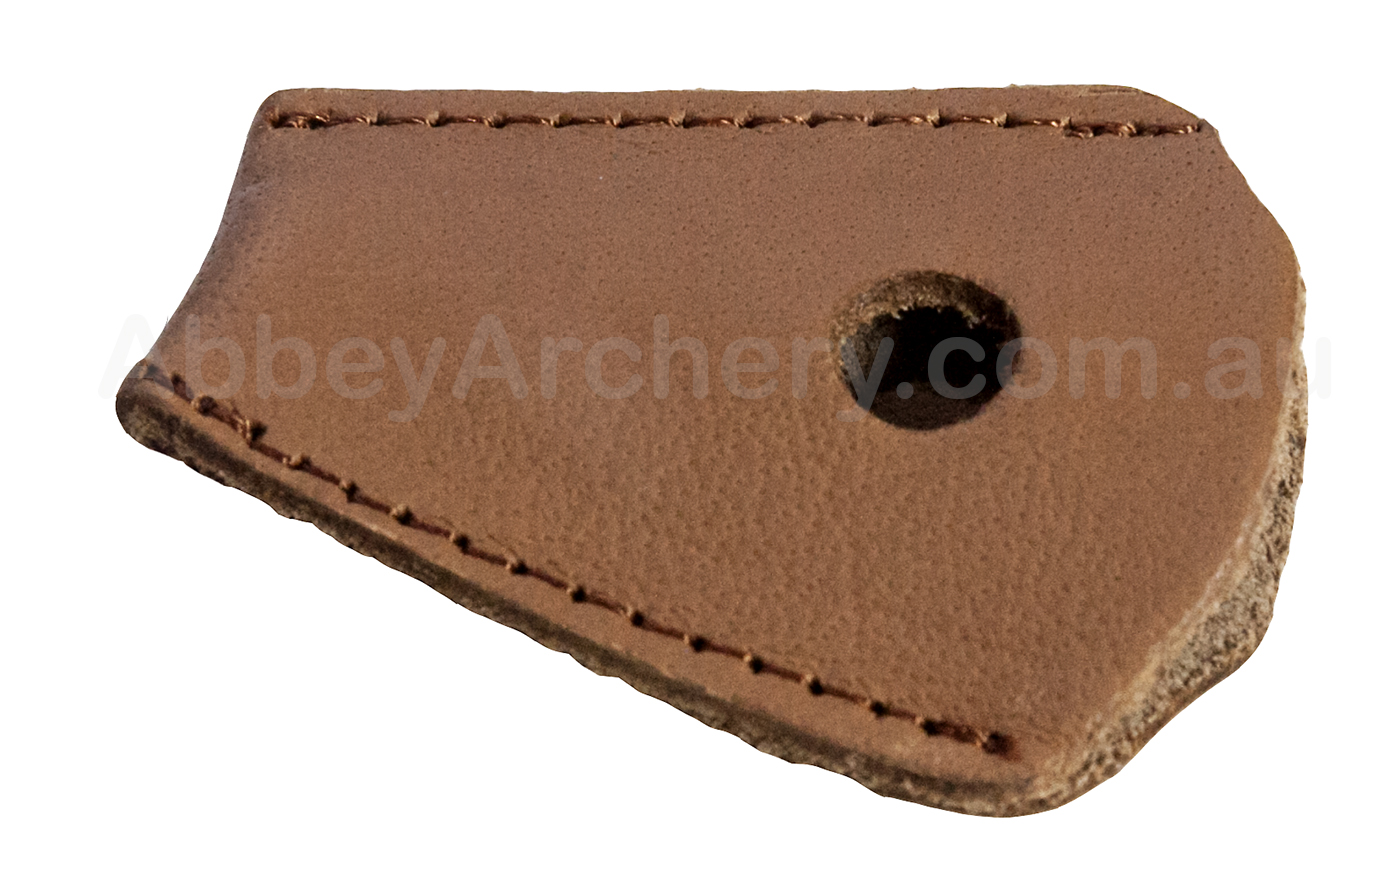 Abbey Leather Bow Tip Protector large image. Click to return to Abbey Leather Bow Tip Protector price and description